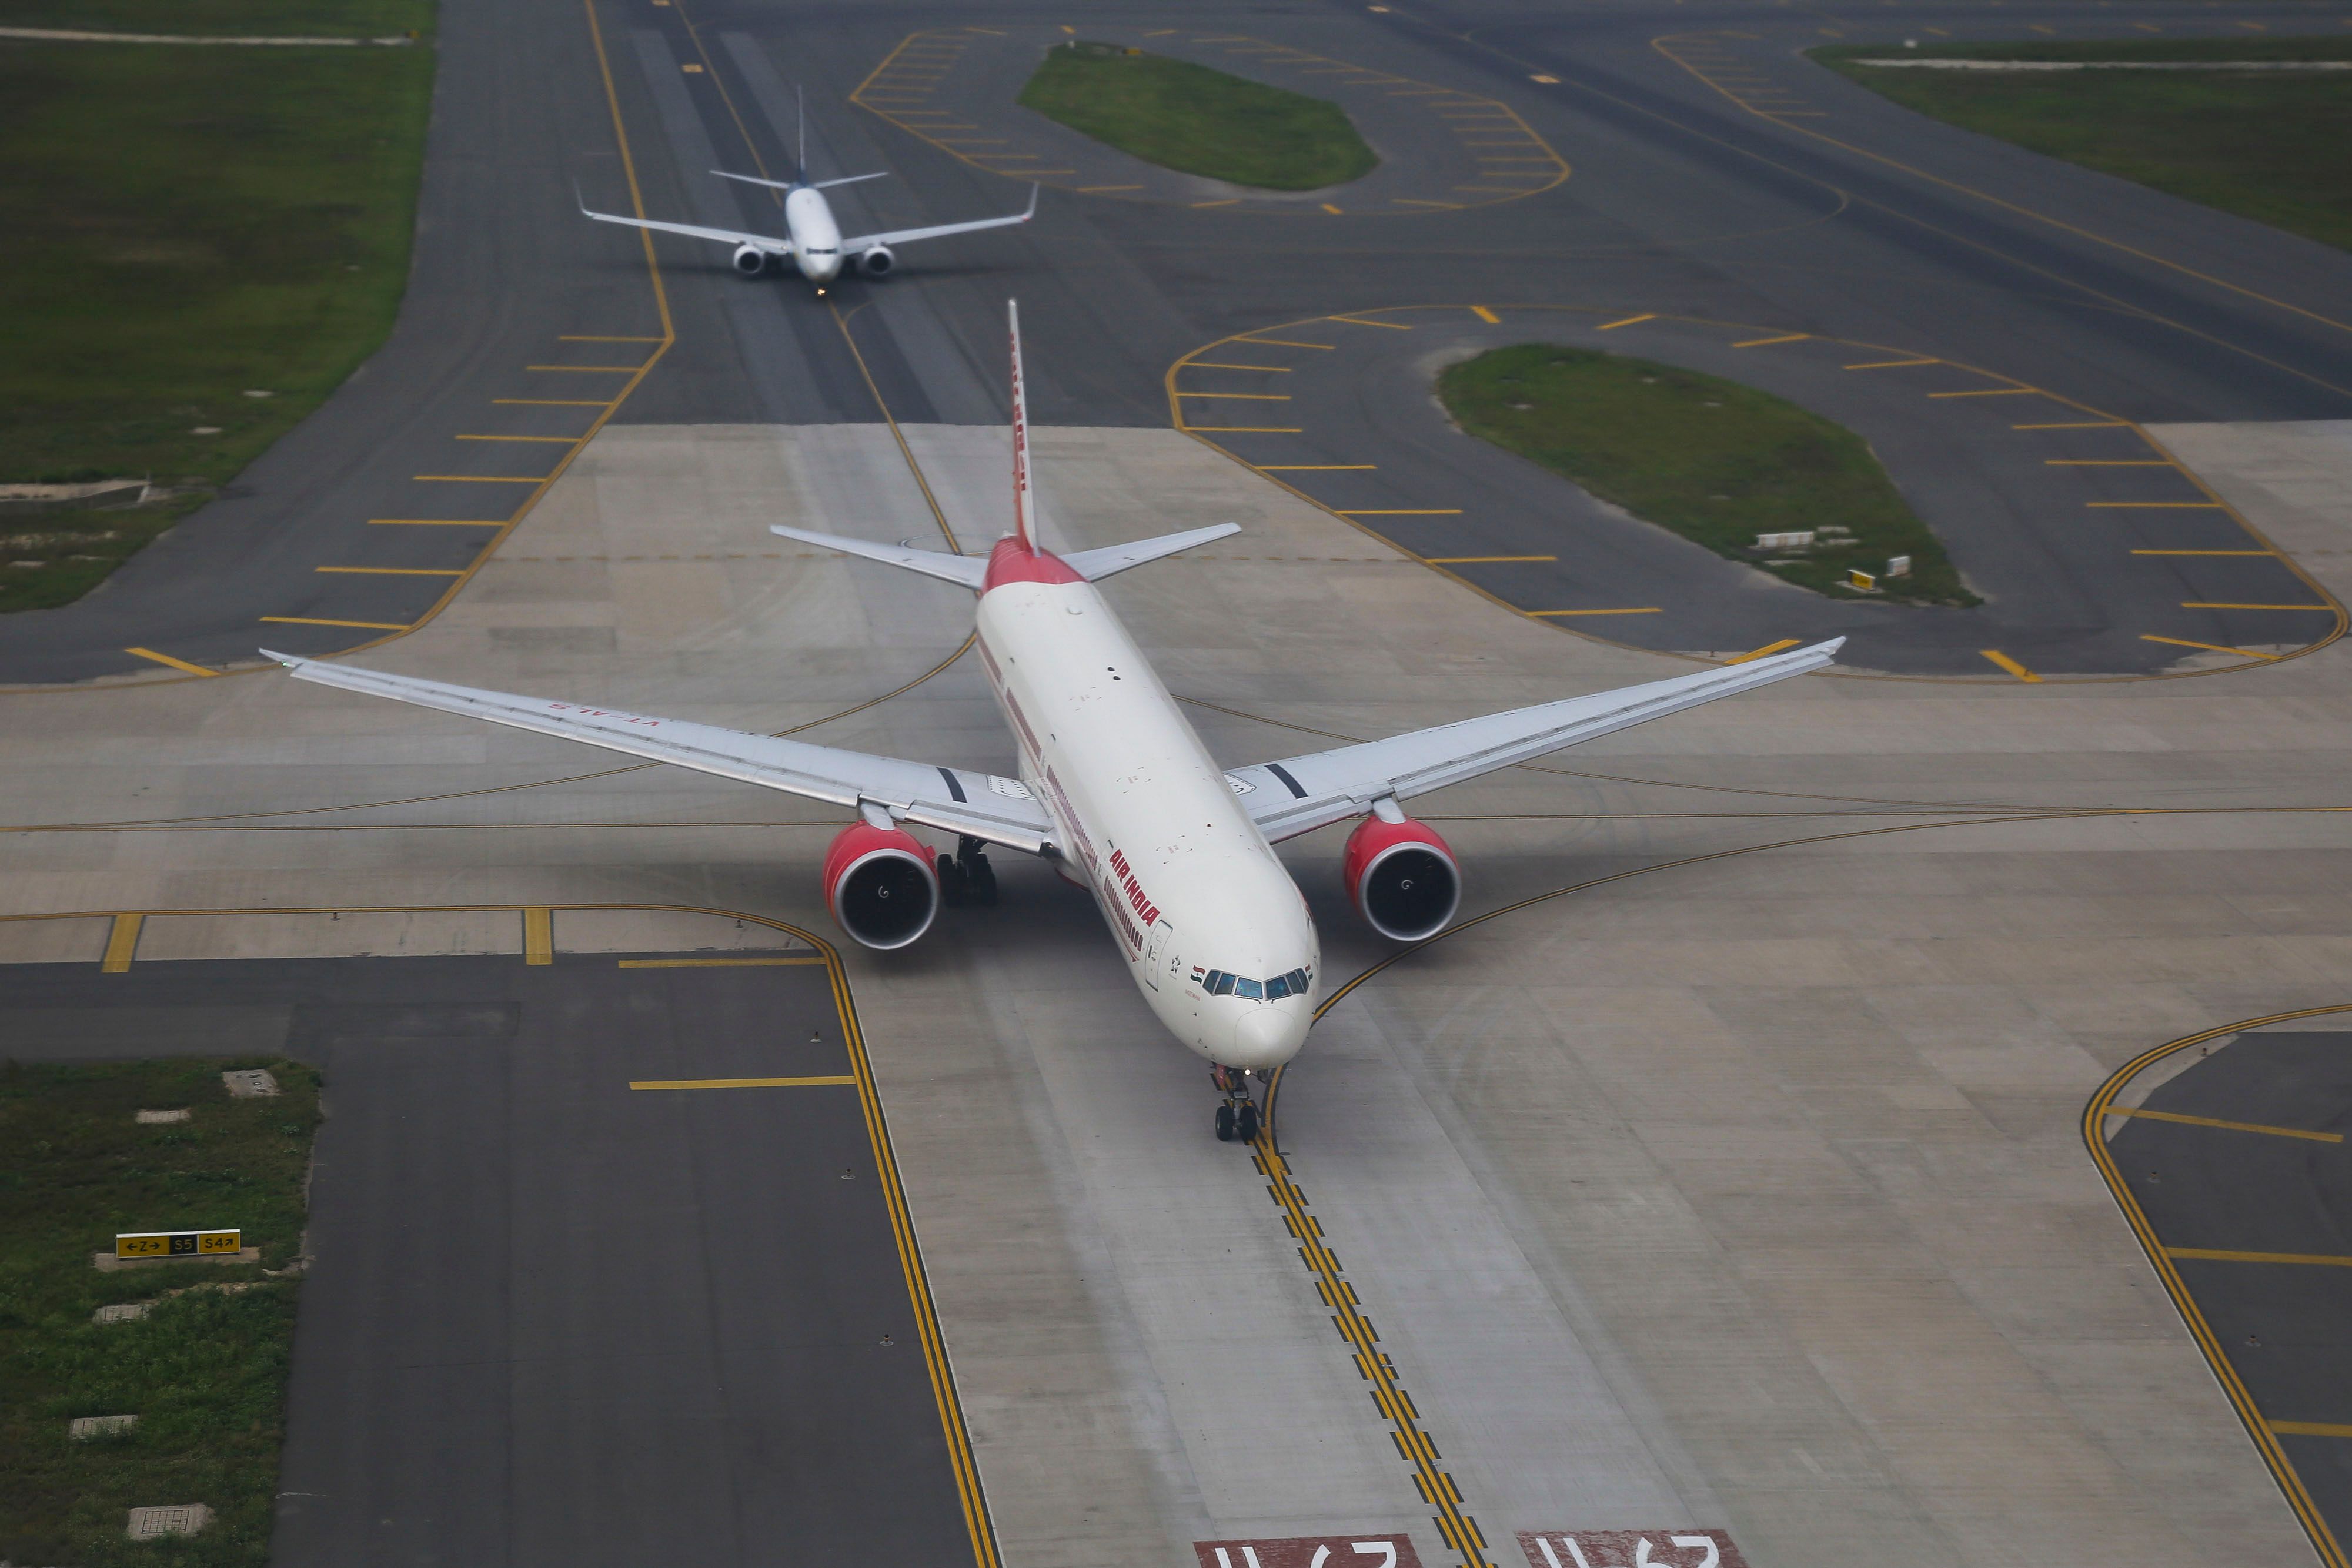 September Report: India Sees 10 Million+ Passengers But Trails Pre-COVID Figures